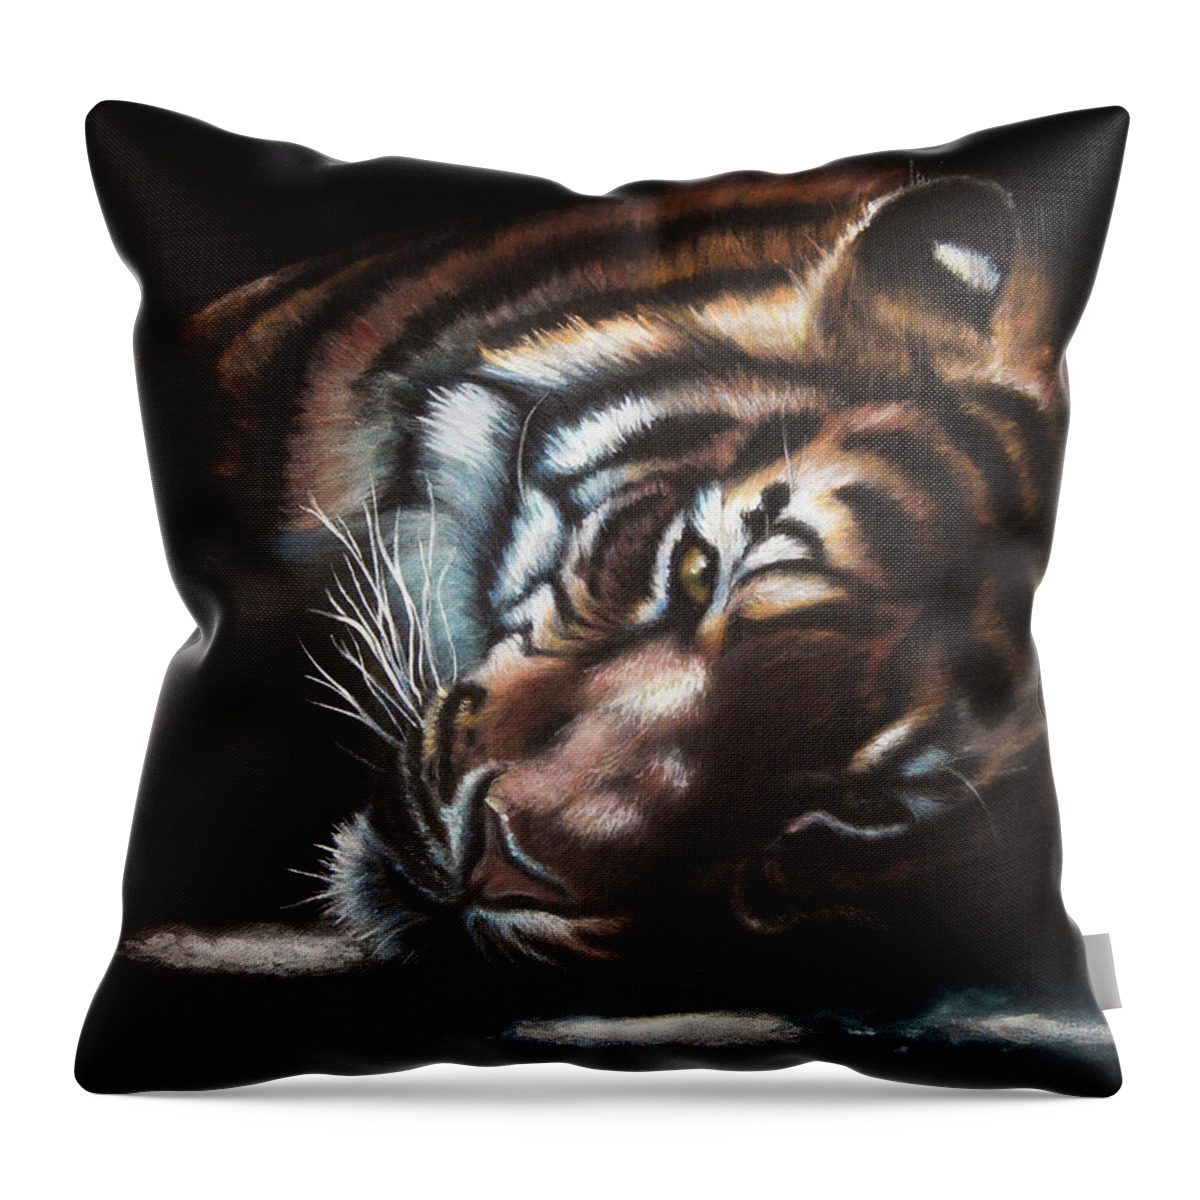 Tiger Throw Pillow featuring the painting Content by Kirsty Rebecca